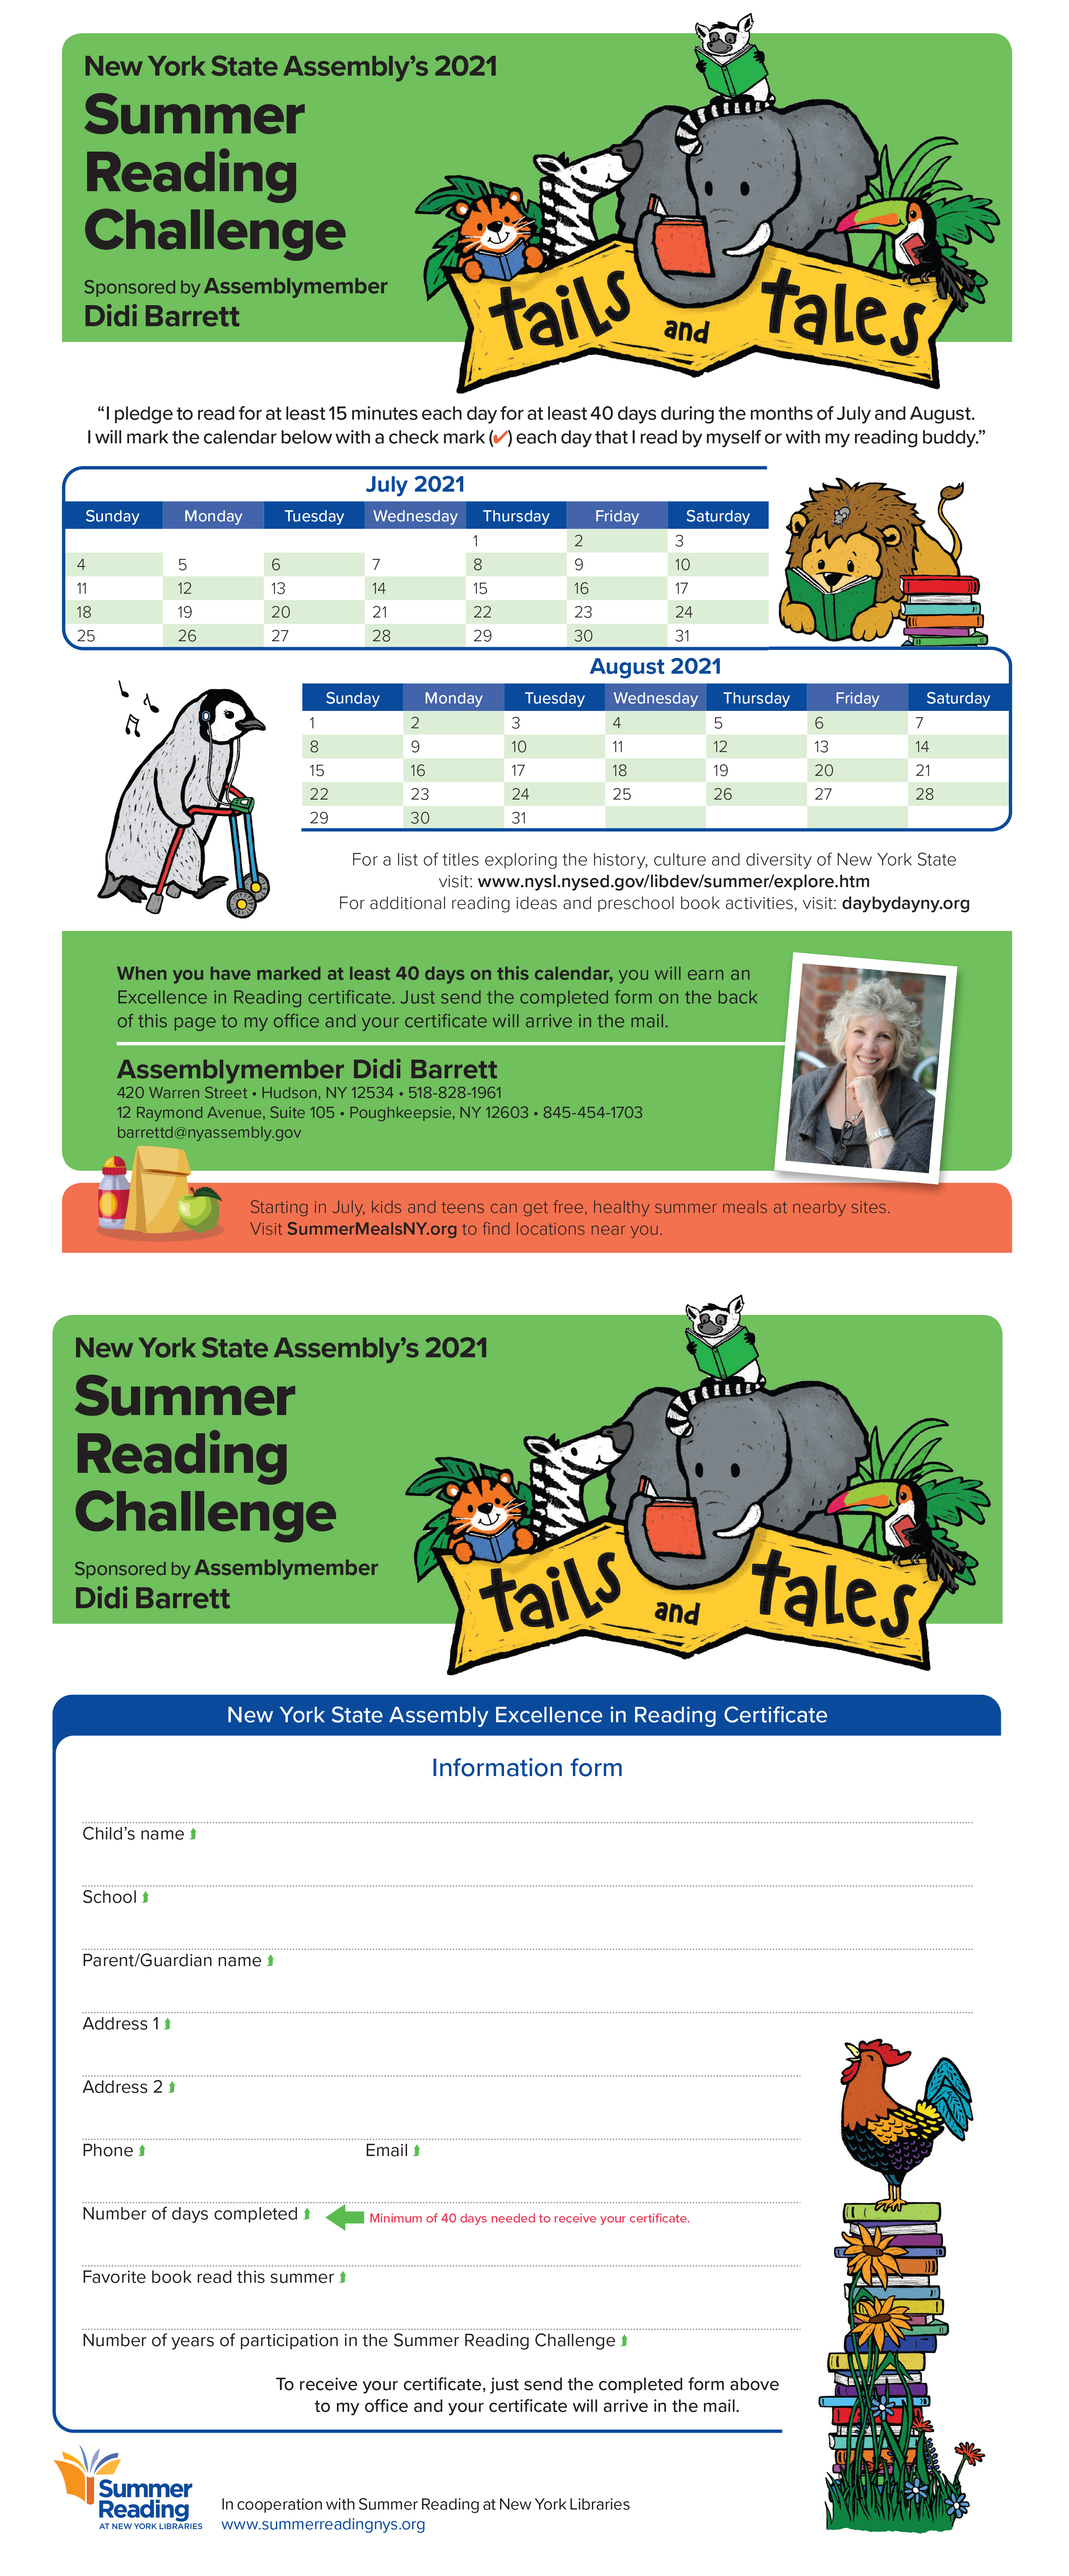 New York State Assembly's 2021 Summer Reading Challenge Calendar